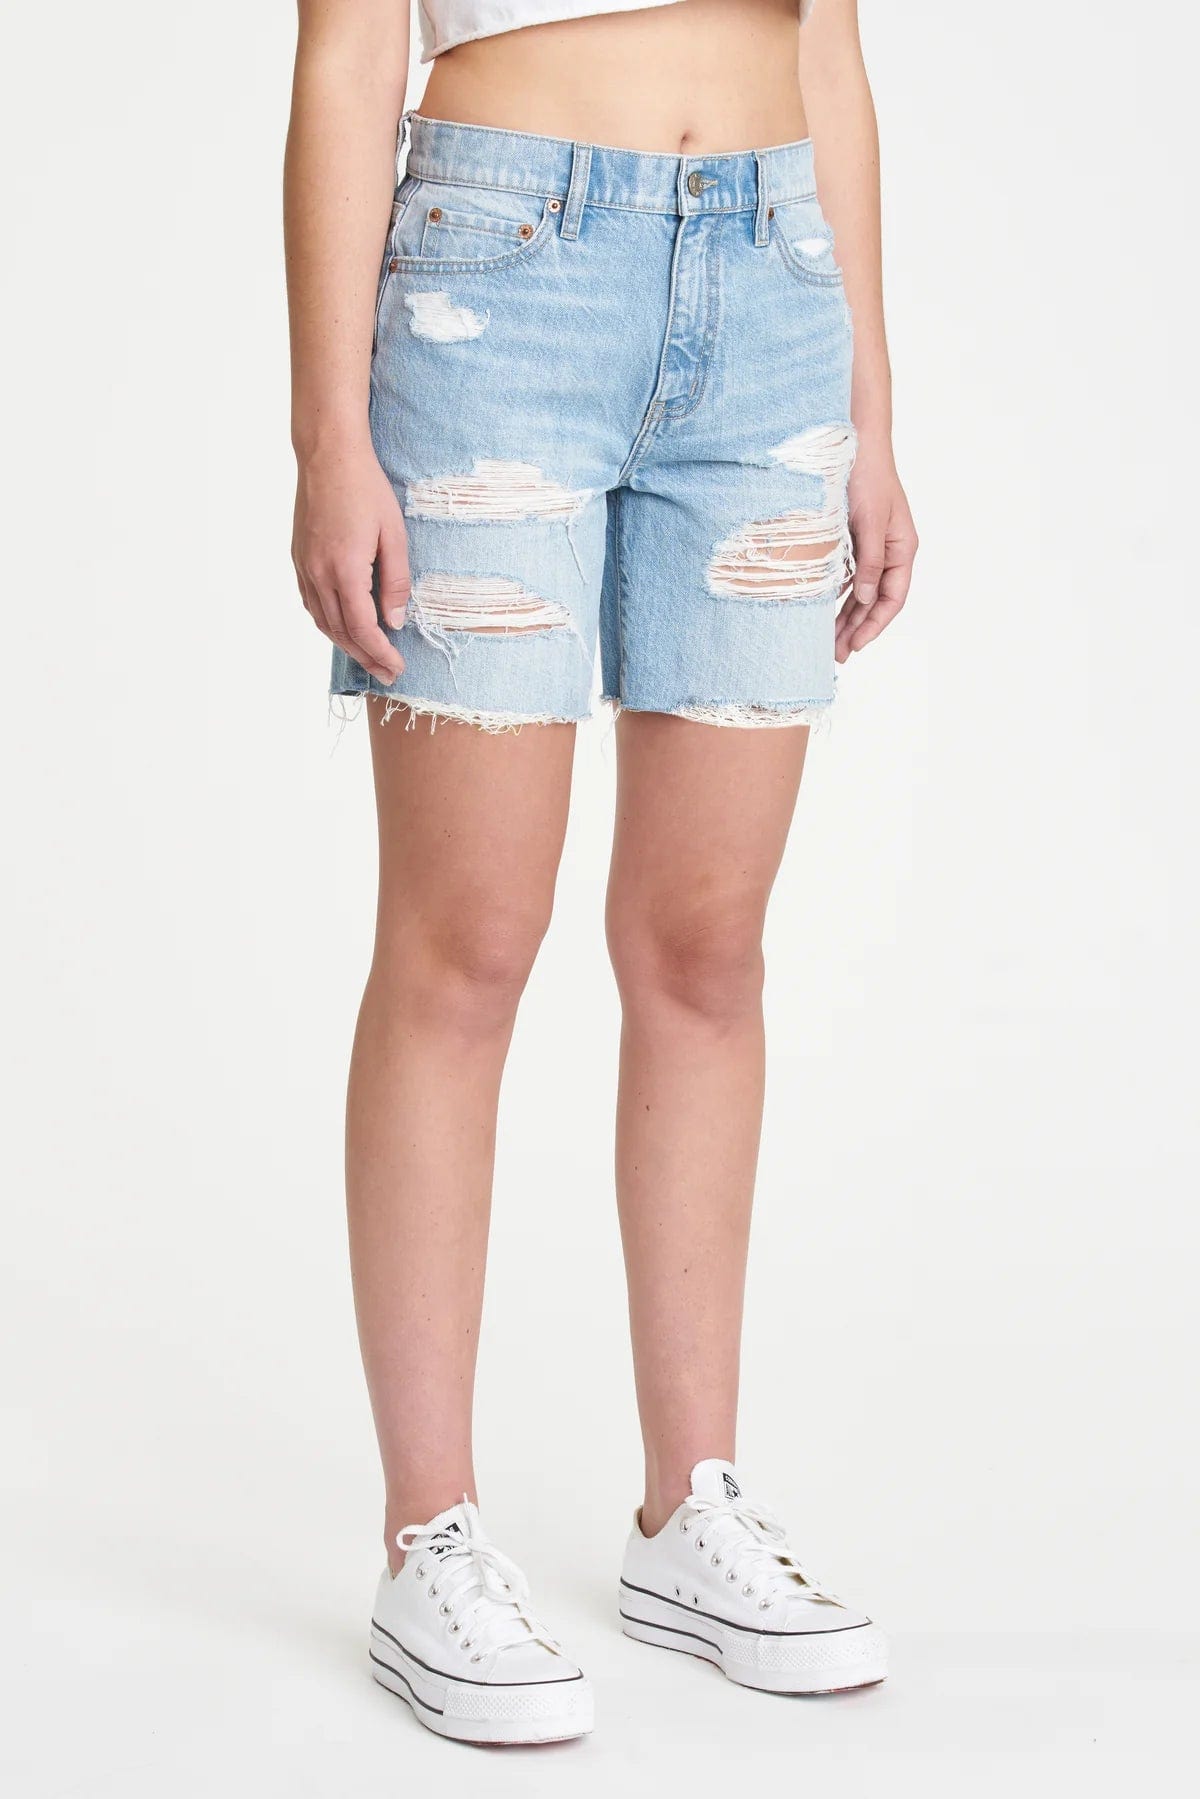 DAZE 1999 Slouch 90's Fit Denim Shorts in Intuition - Shorts - Blooming Daily